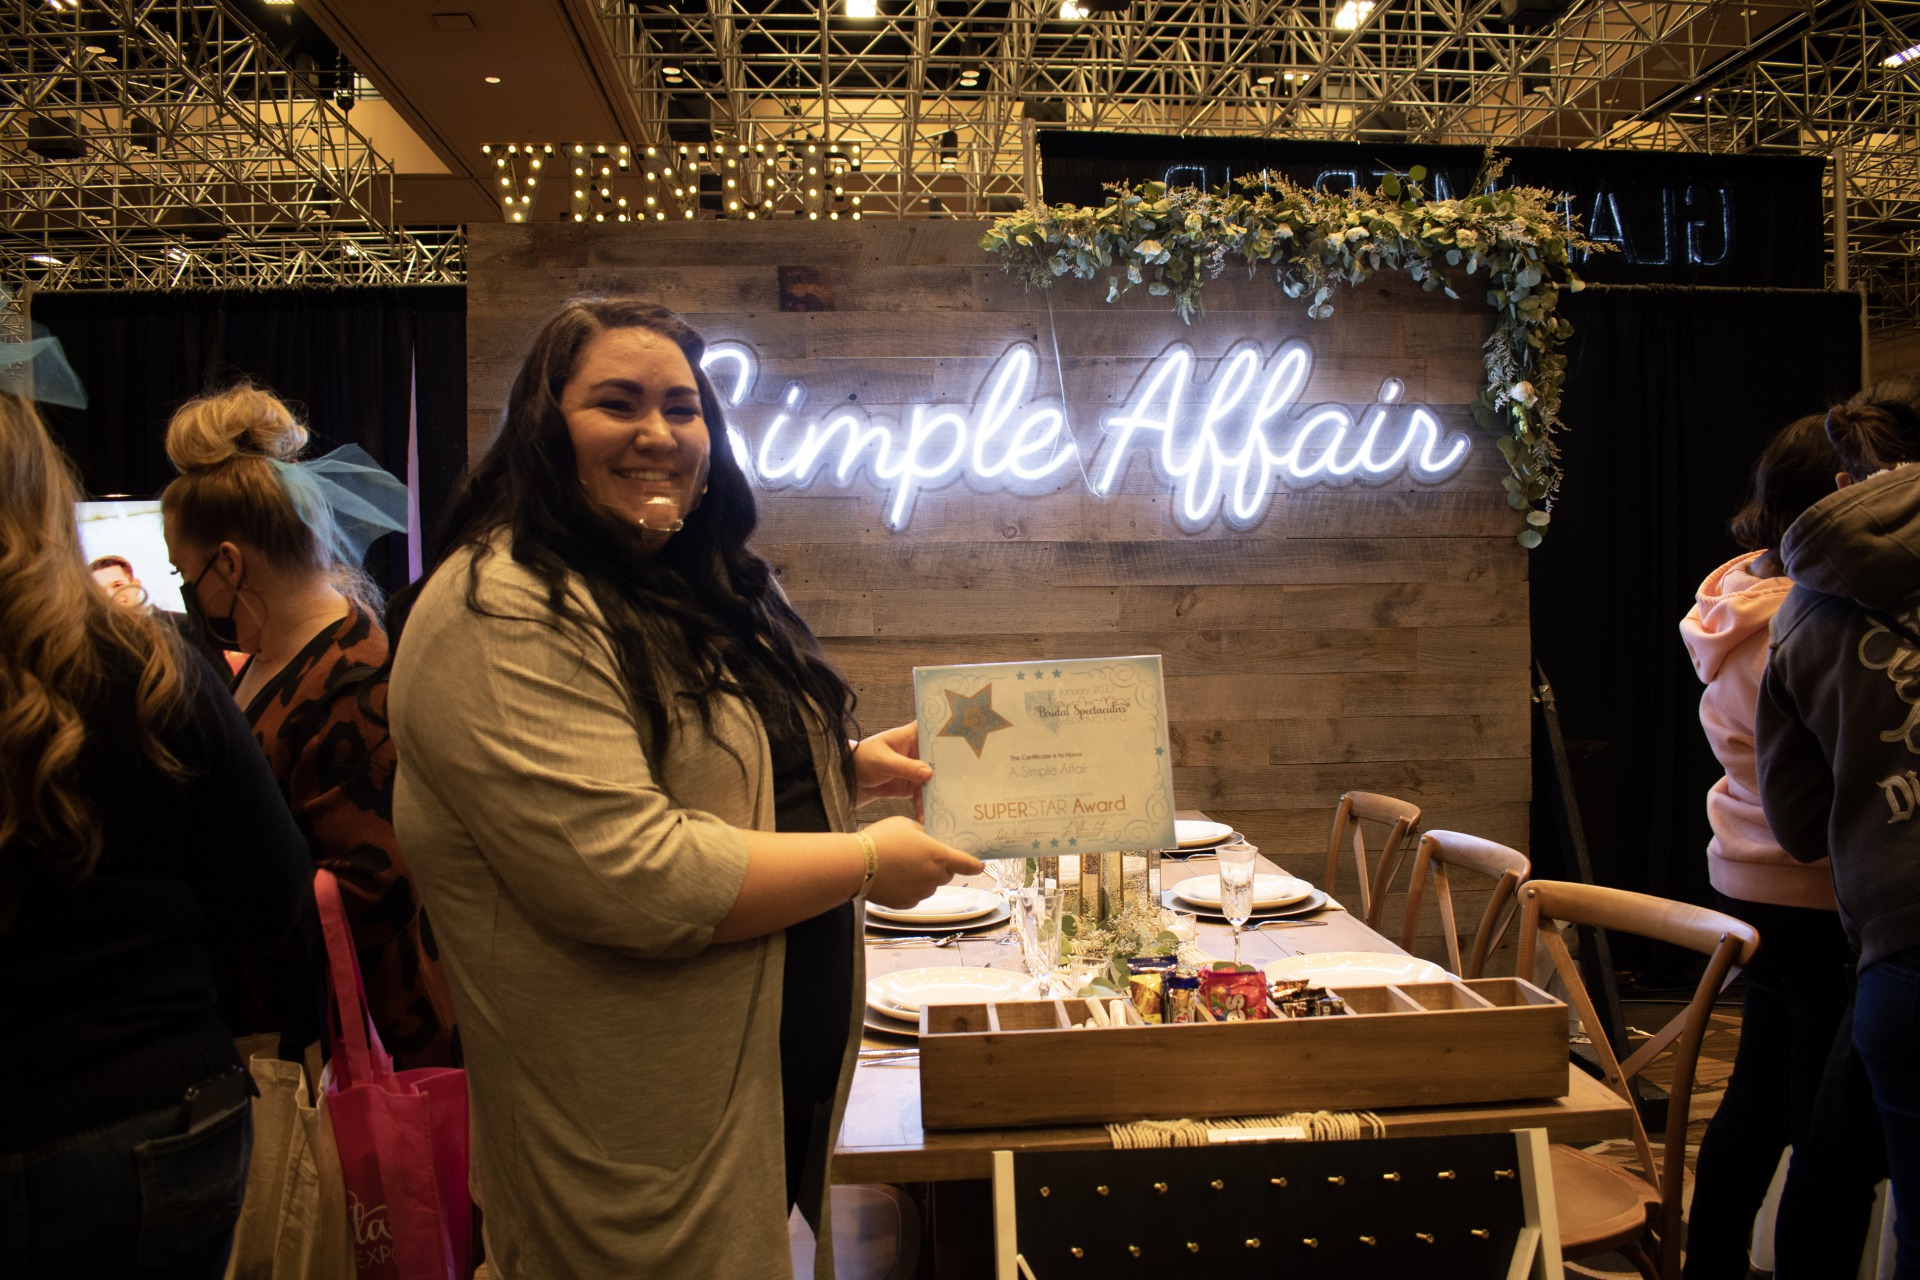 A Simple Affair, Las VEgas WEdding Professionals, were awarded at the Bridal Spectacular